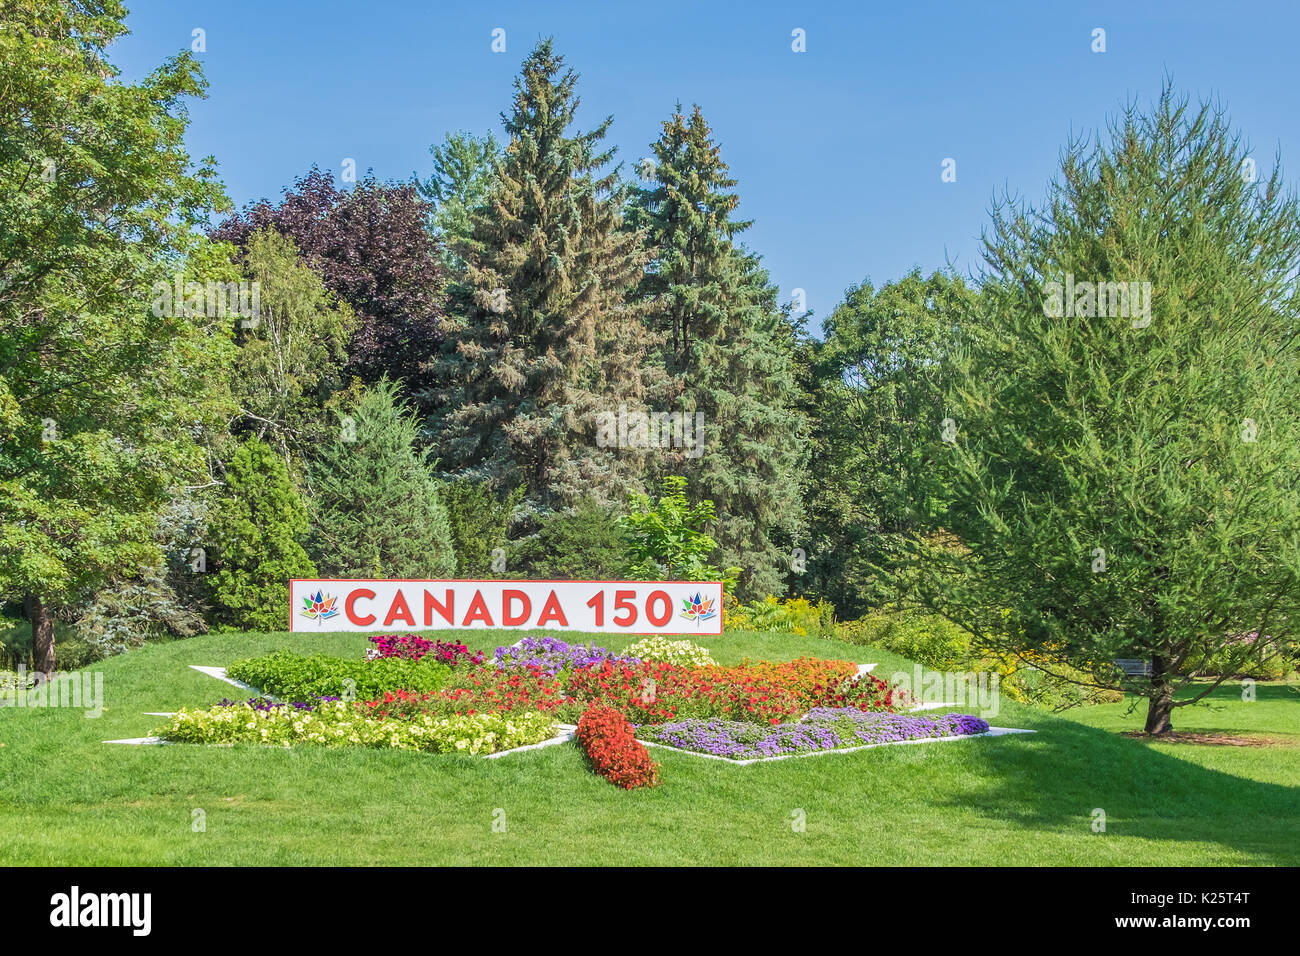 Beautiful garden commemorating the 150 anniversary of Canada’s confederation located in Barrie Ontario. Stock Photo